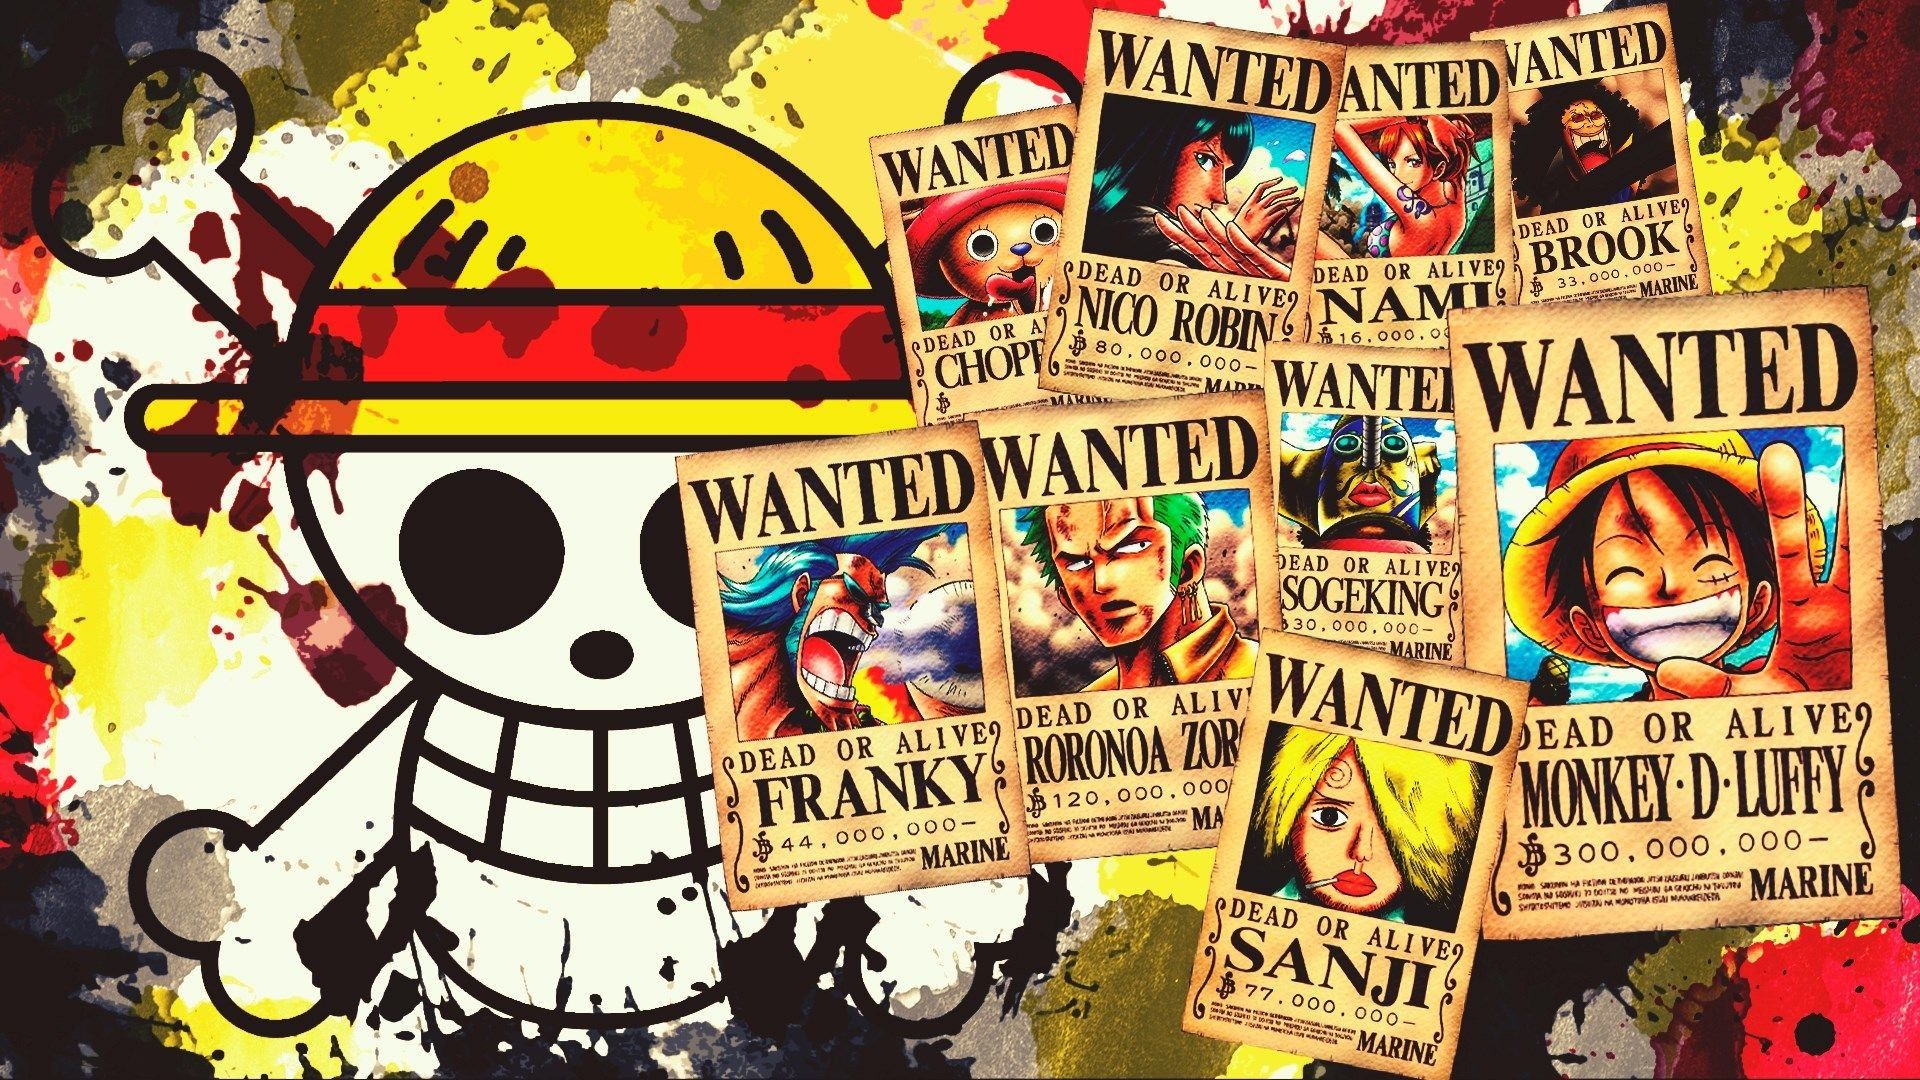 One Piece Wanted Poster Wallpapers - Wallpaper Cave 1920x1080 one piece wal...